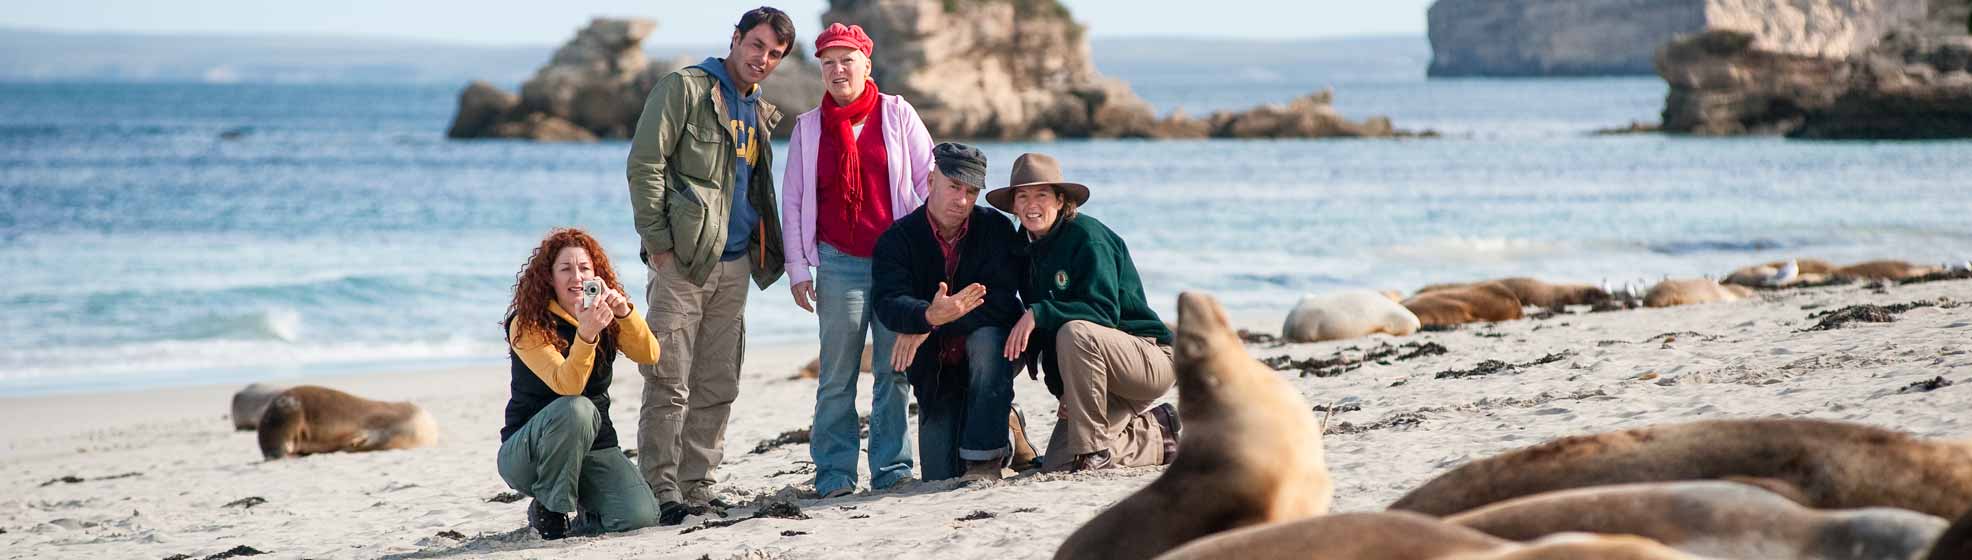 Which wildlife should you keep an eye out for at Kangaroo Island?